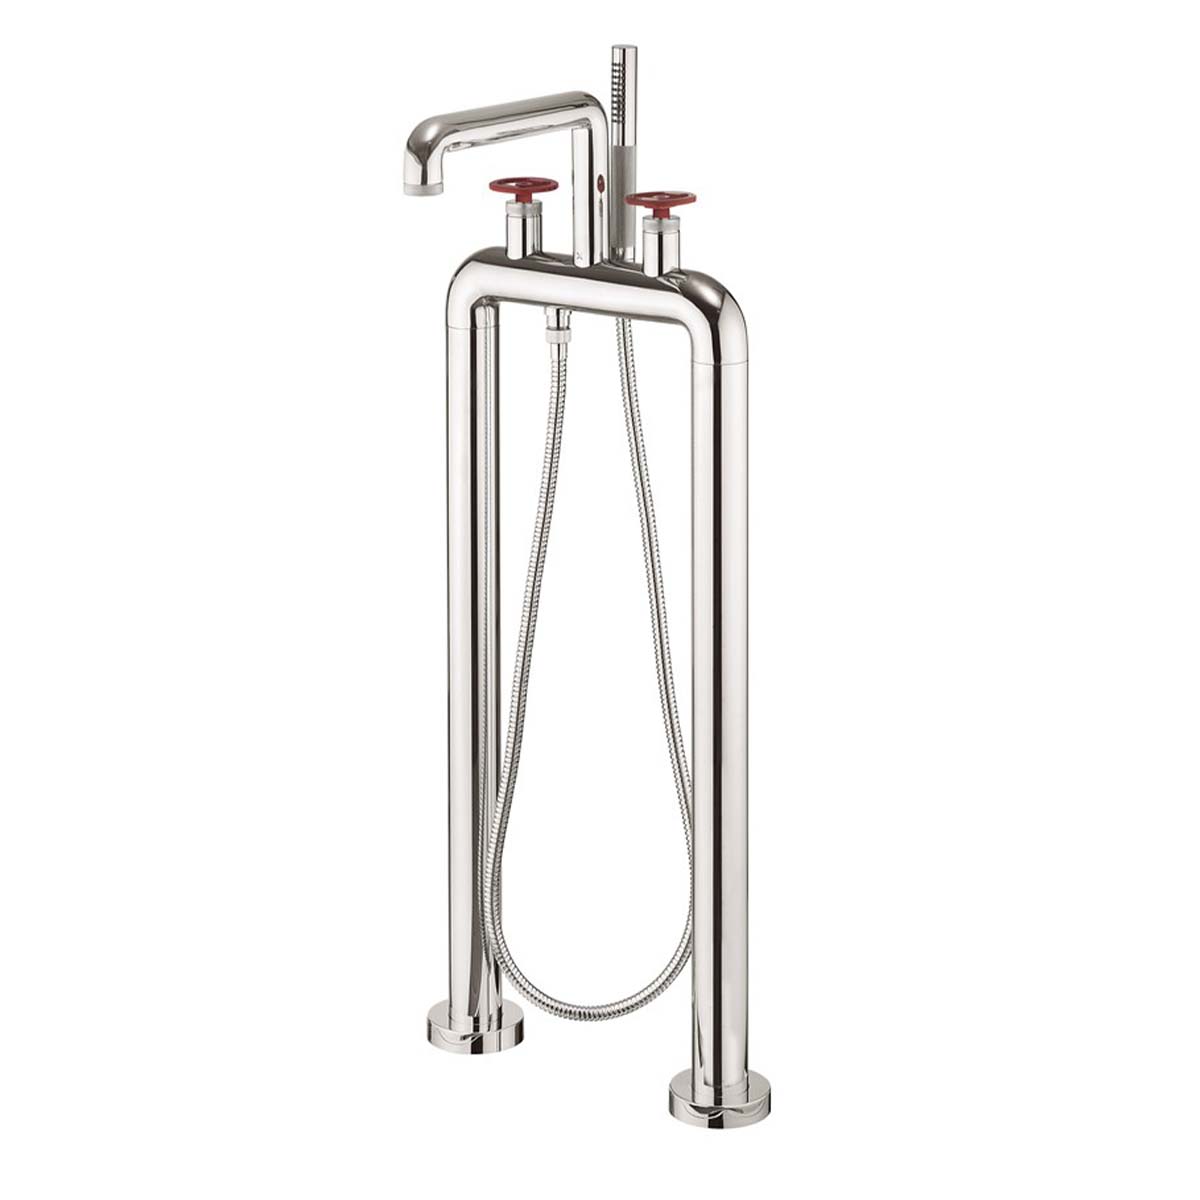 Crosswater Union Bath Shower Mixer With Red Wheel Handles Chrome